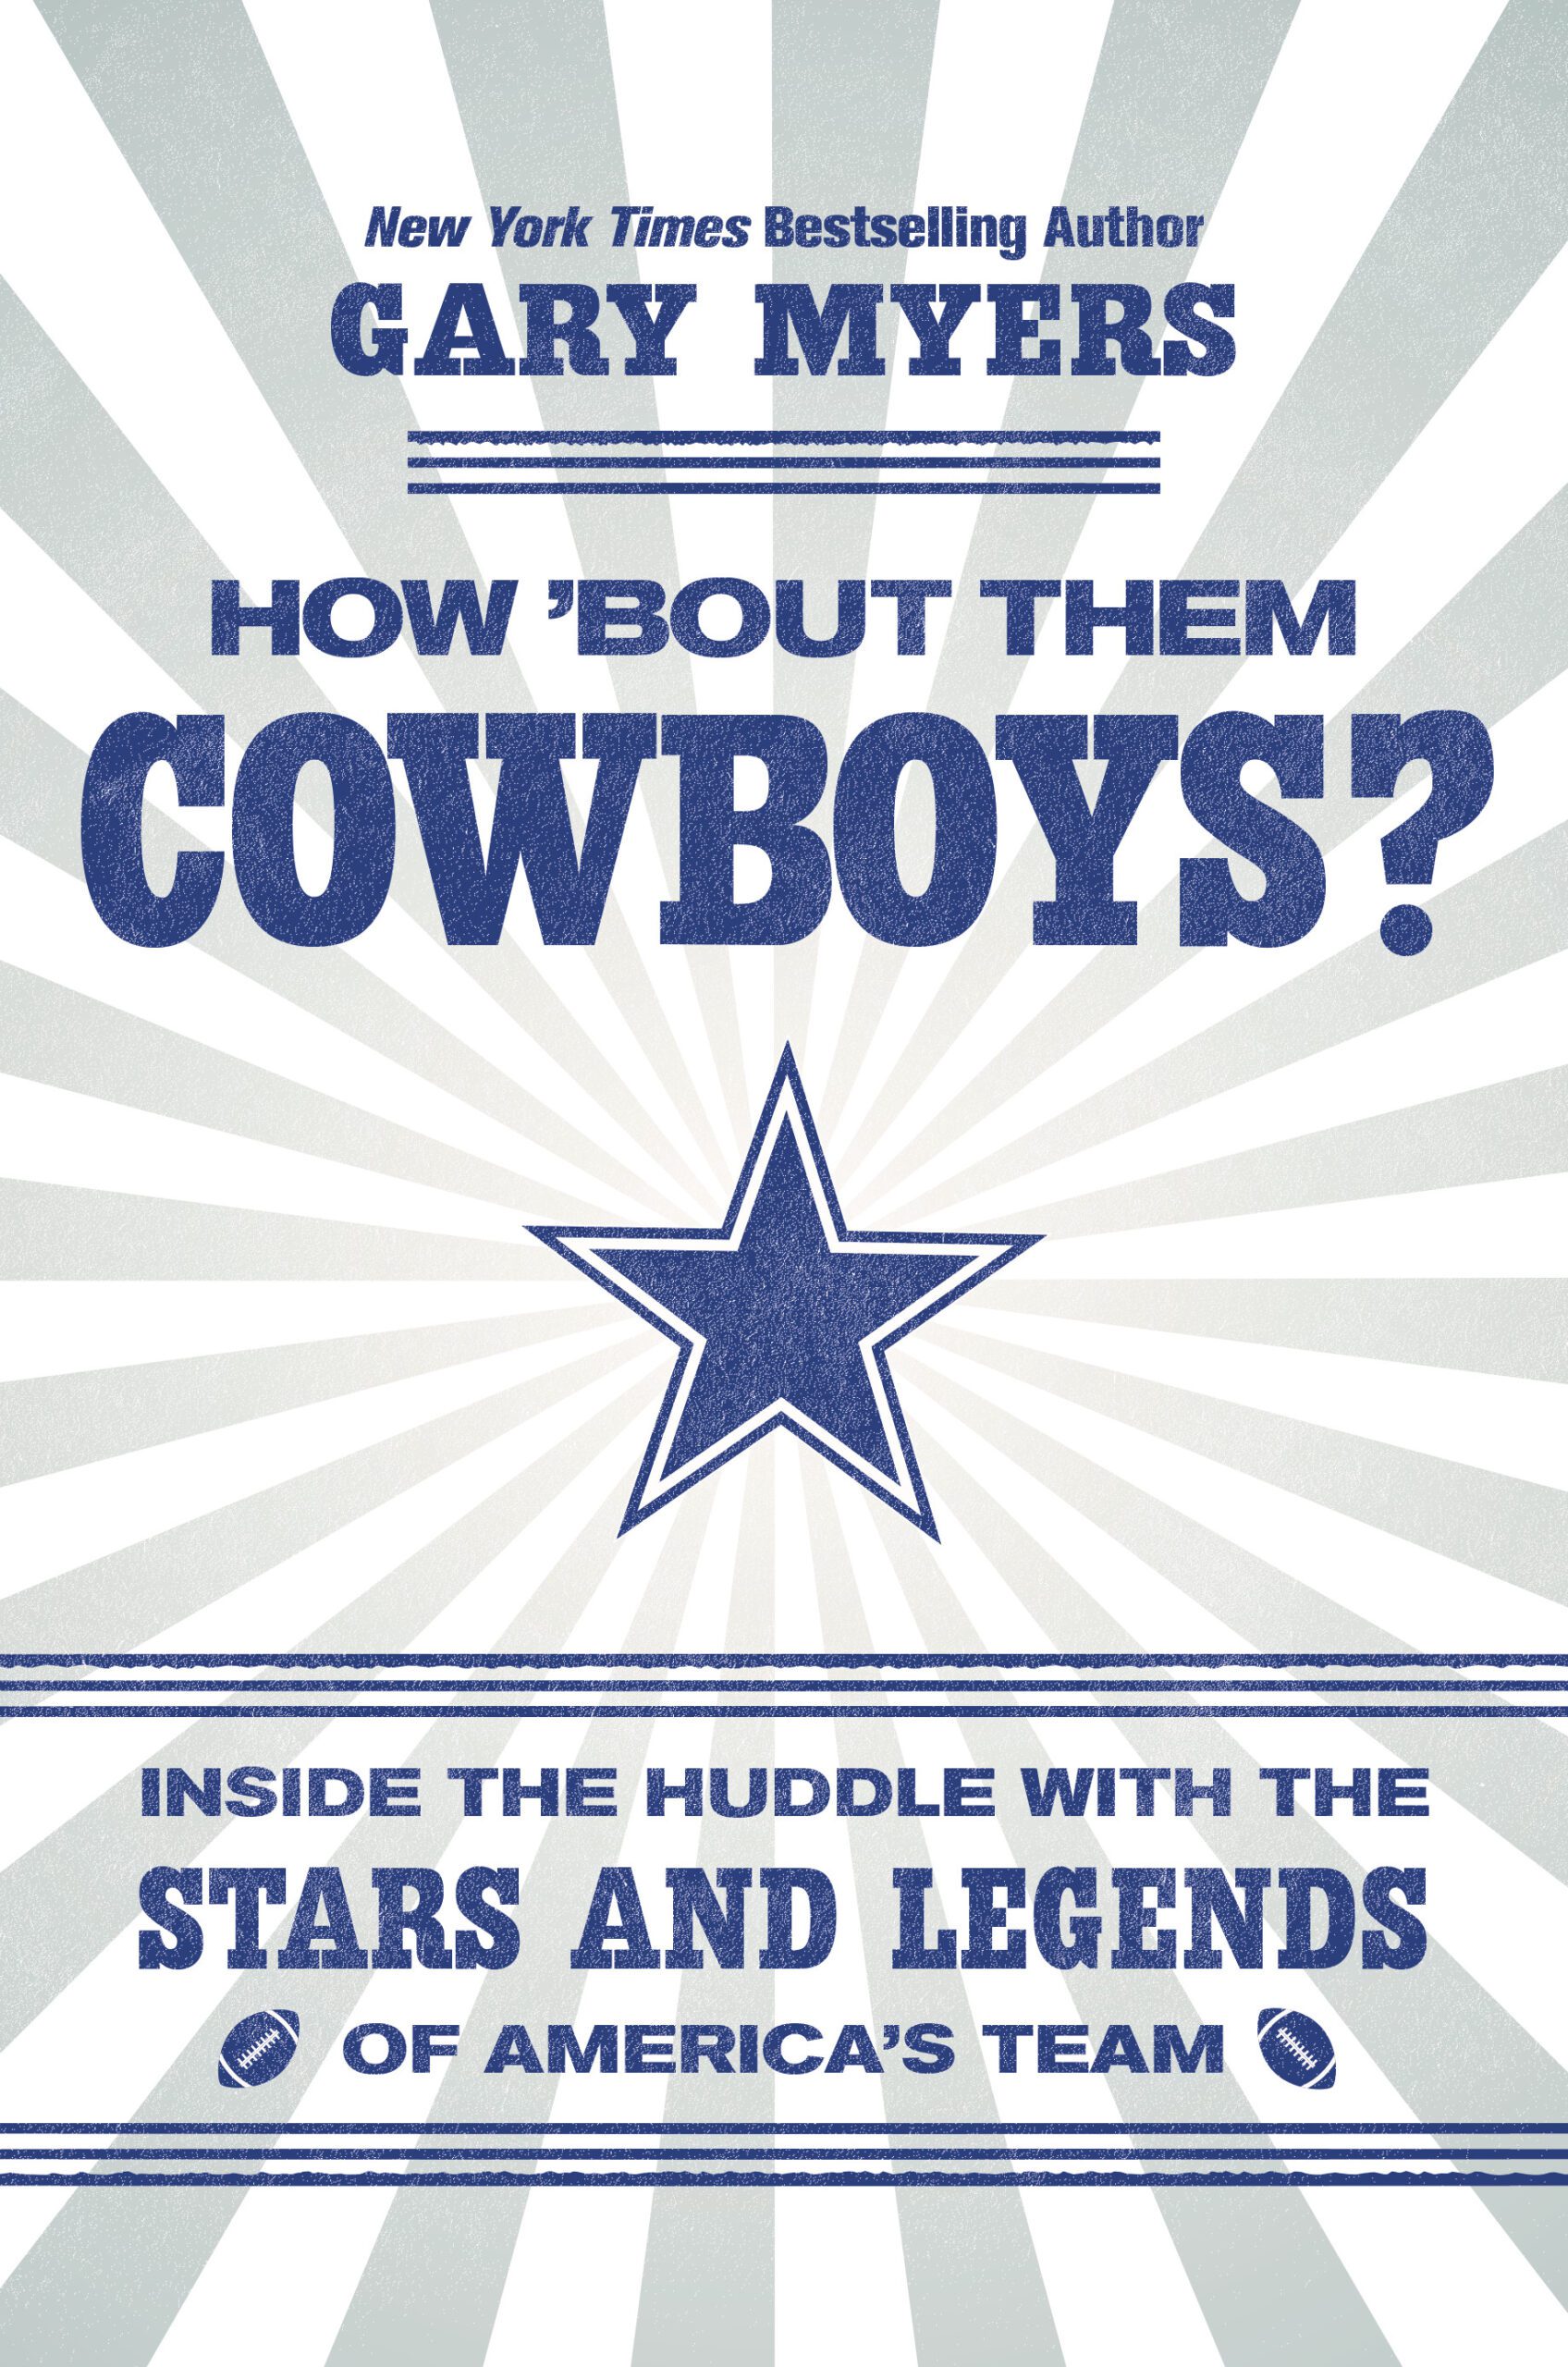 hot-bout-them-cowboys-gary-myers-book-publicist-dallas